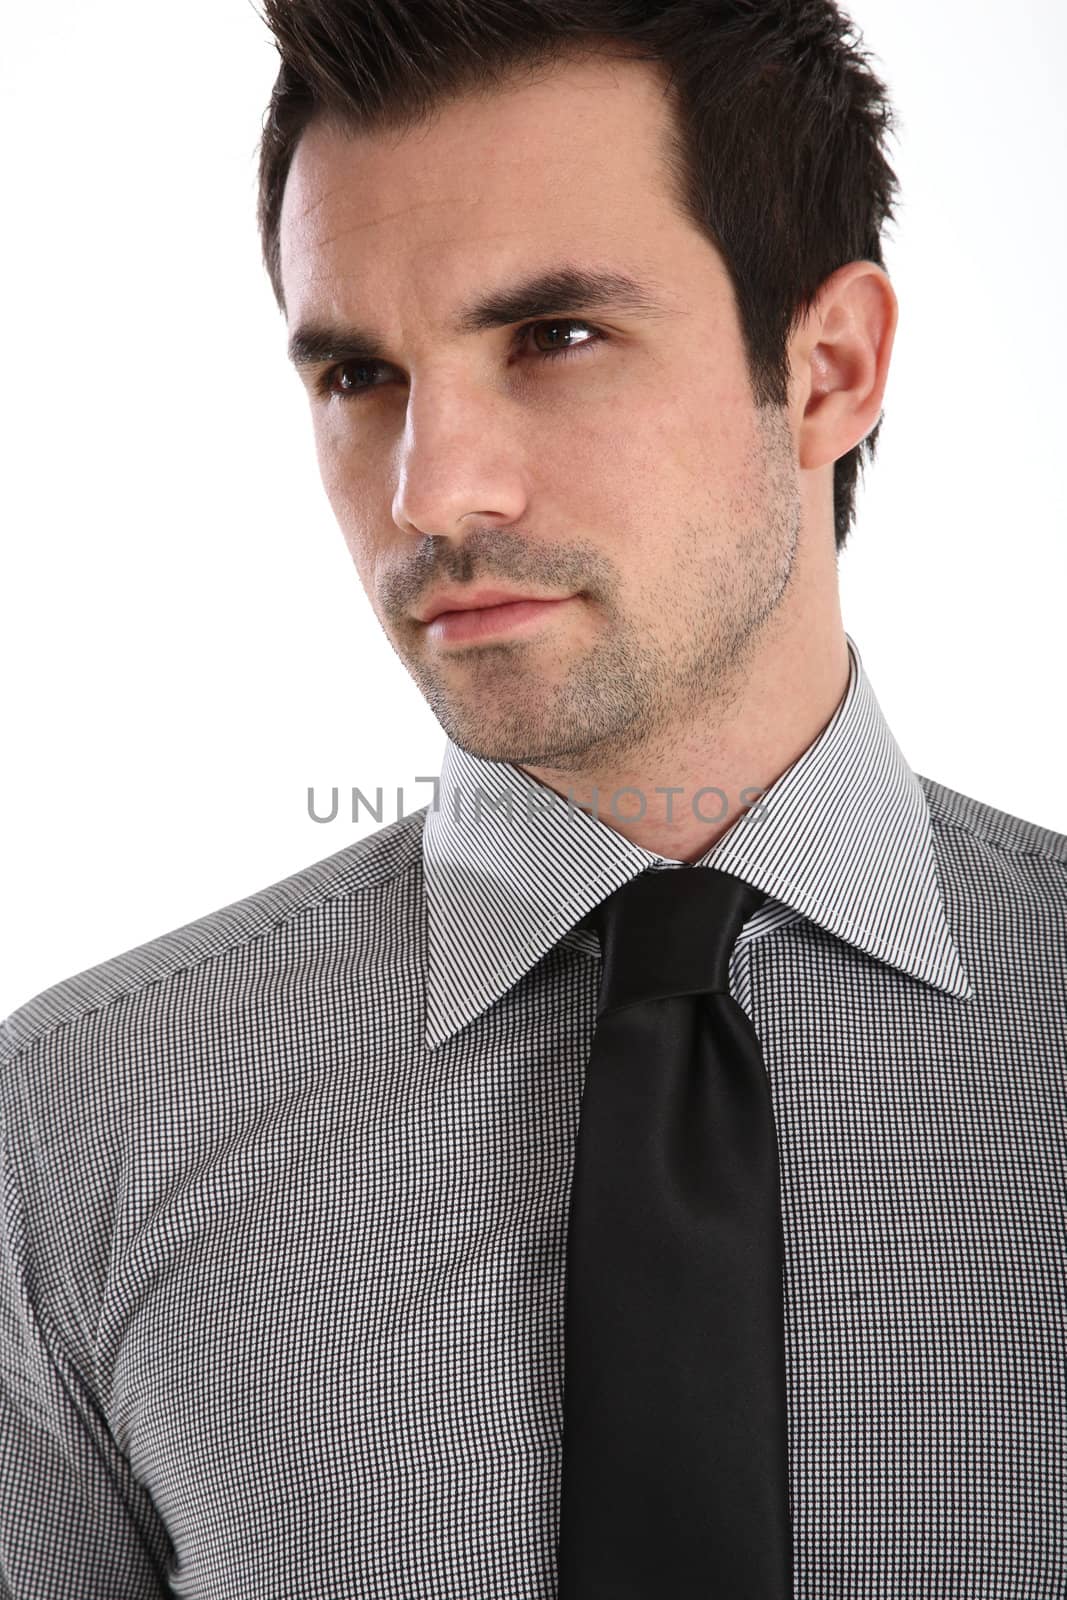 Handsome man in shirt and tie